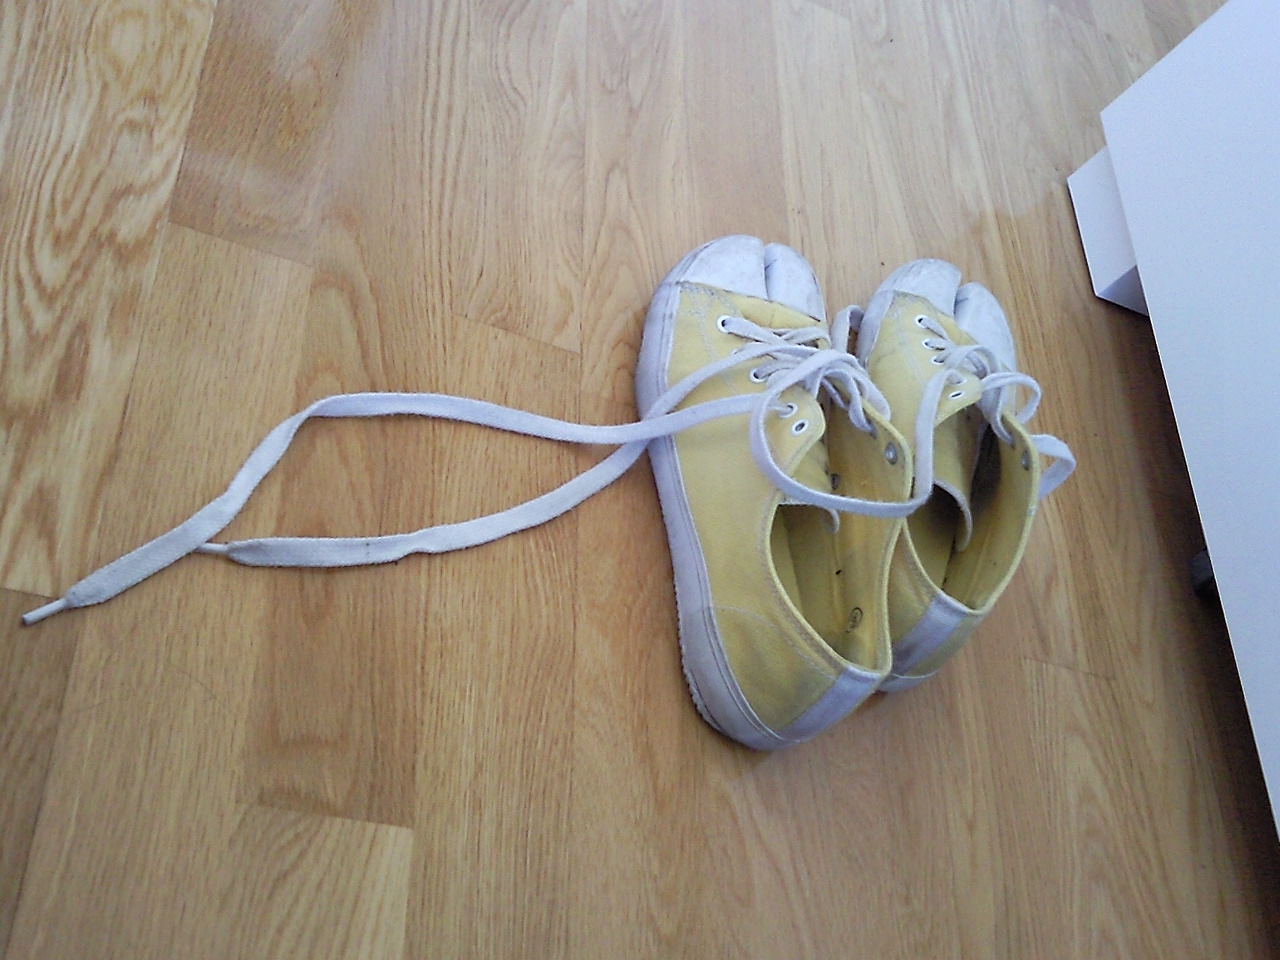 a pair of white tennis shoes that are on the floor